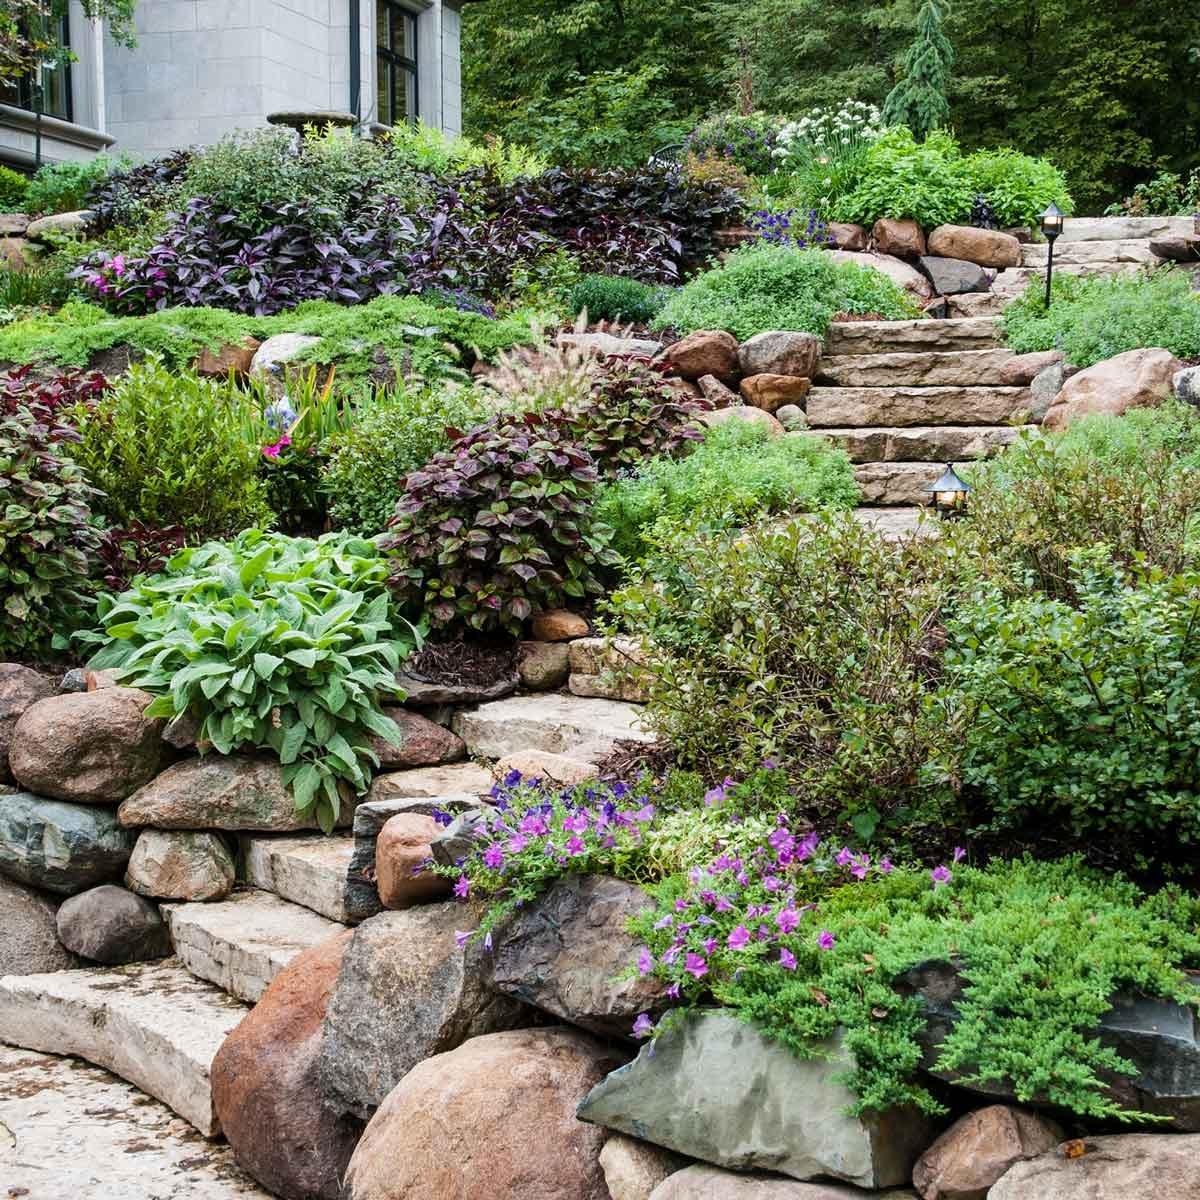 HOW TO GLUE ROCKS TOGETHER FOR LANDSCAPING